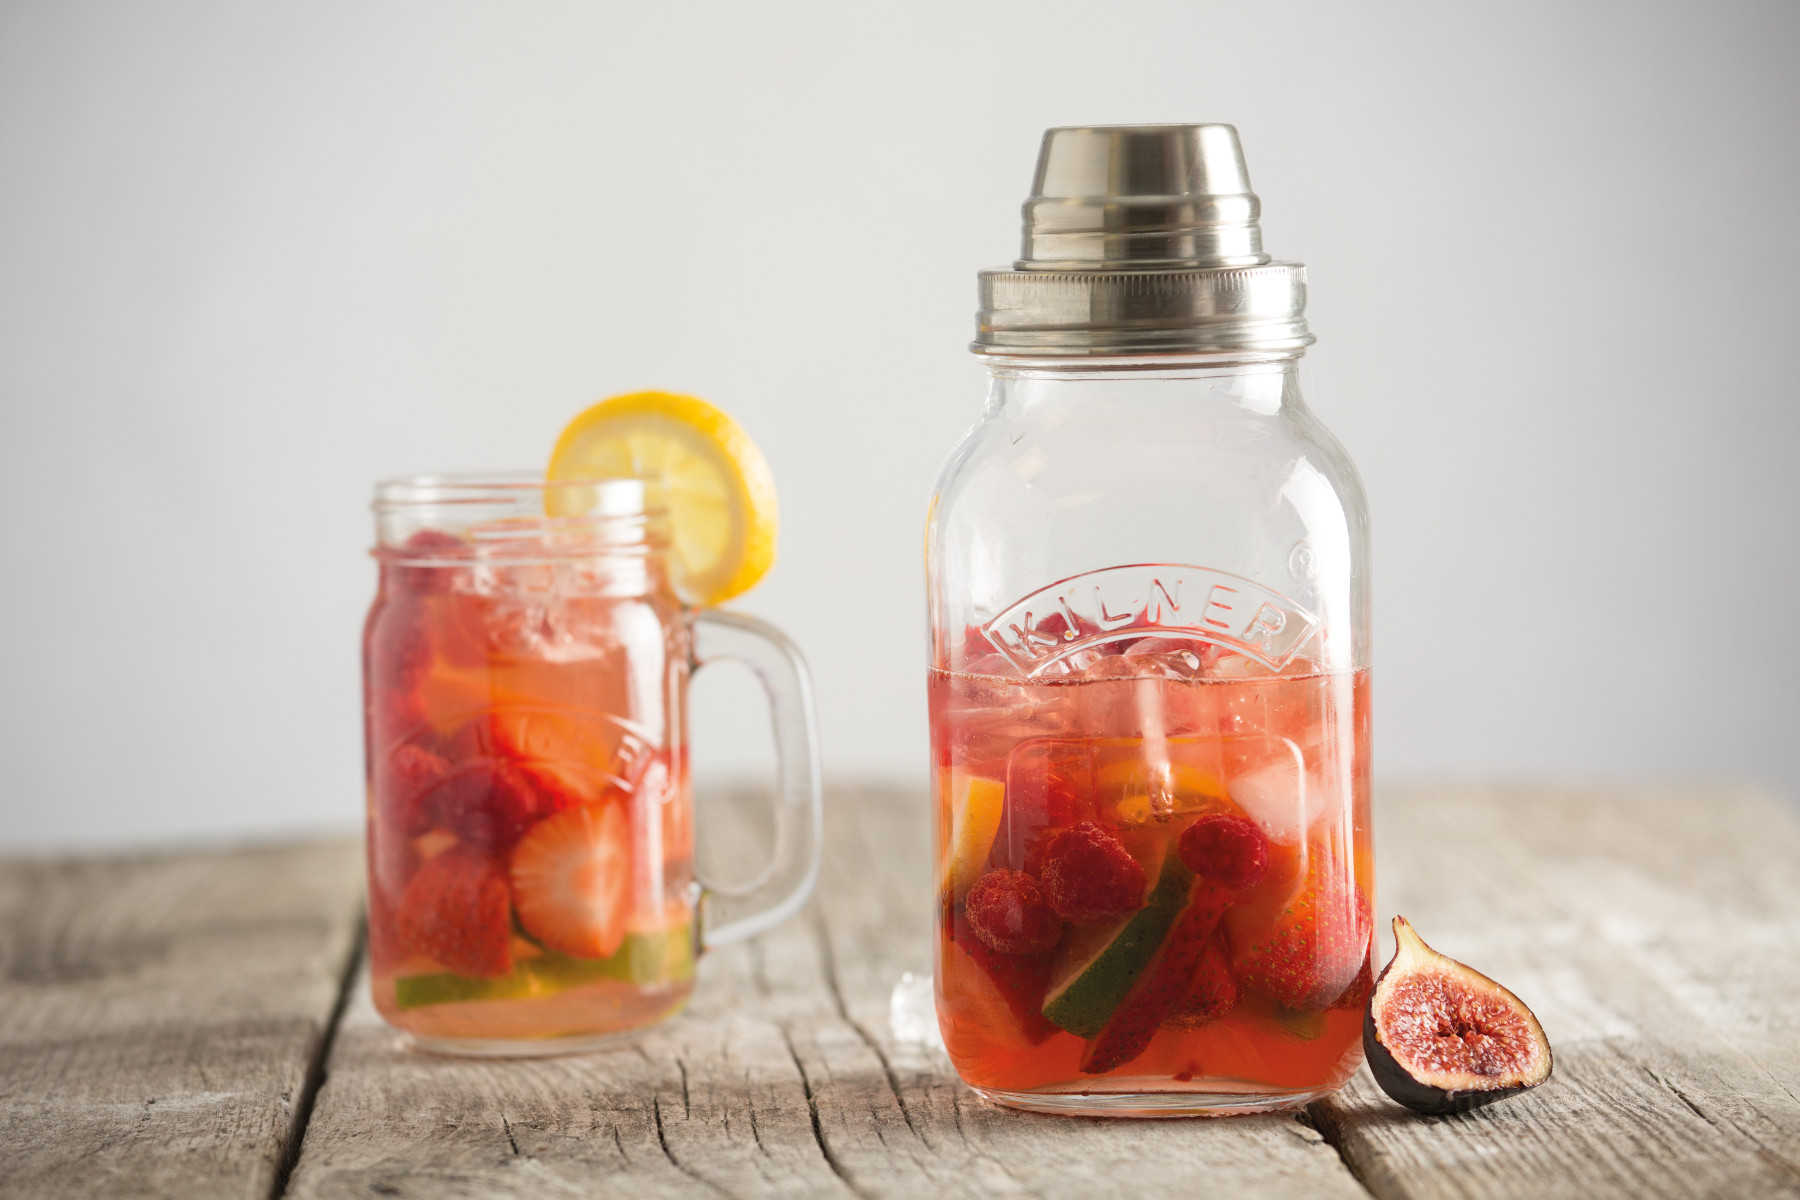 Easy Summer Drink & Cocktail Recipe Ideas with Kilner